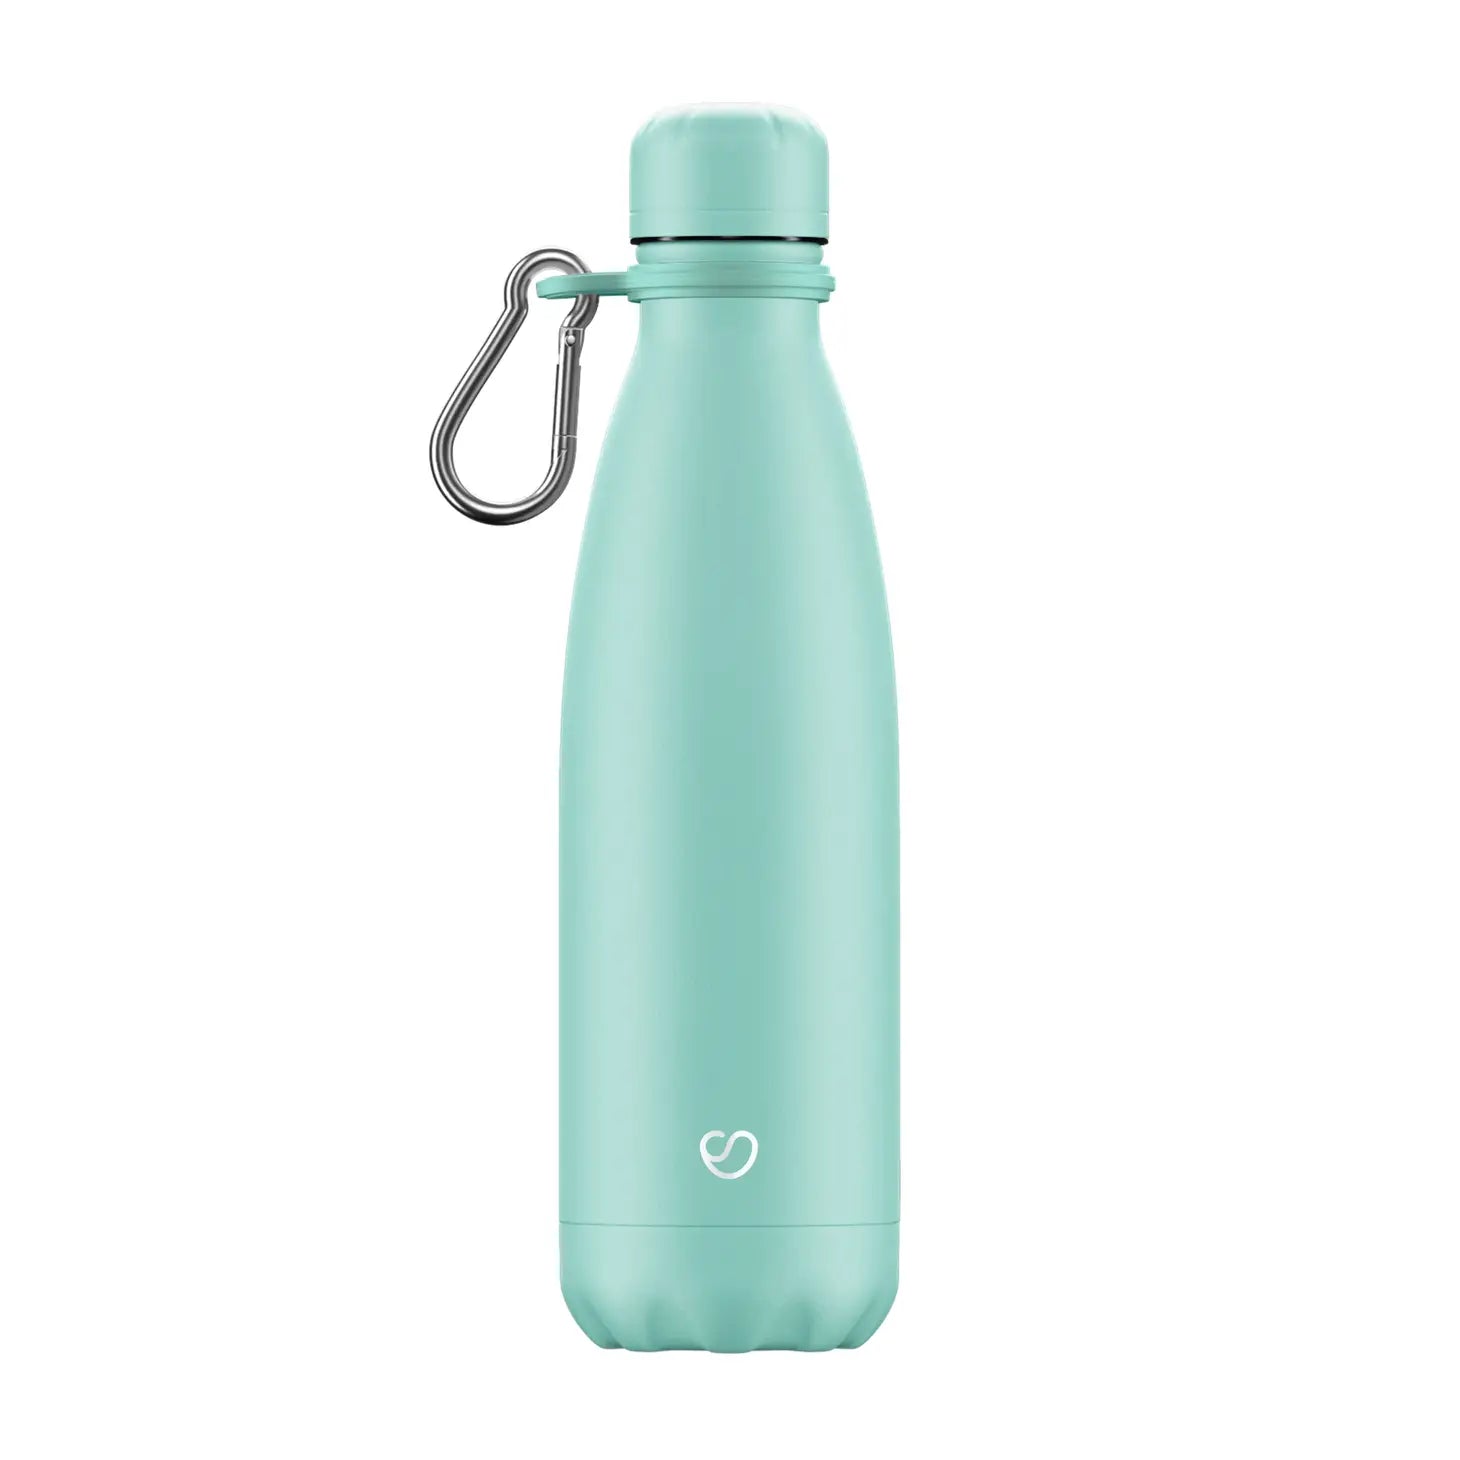 Thermosflasche Mint